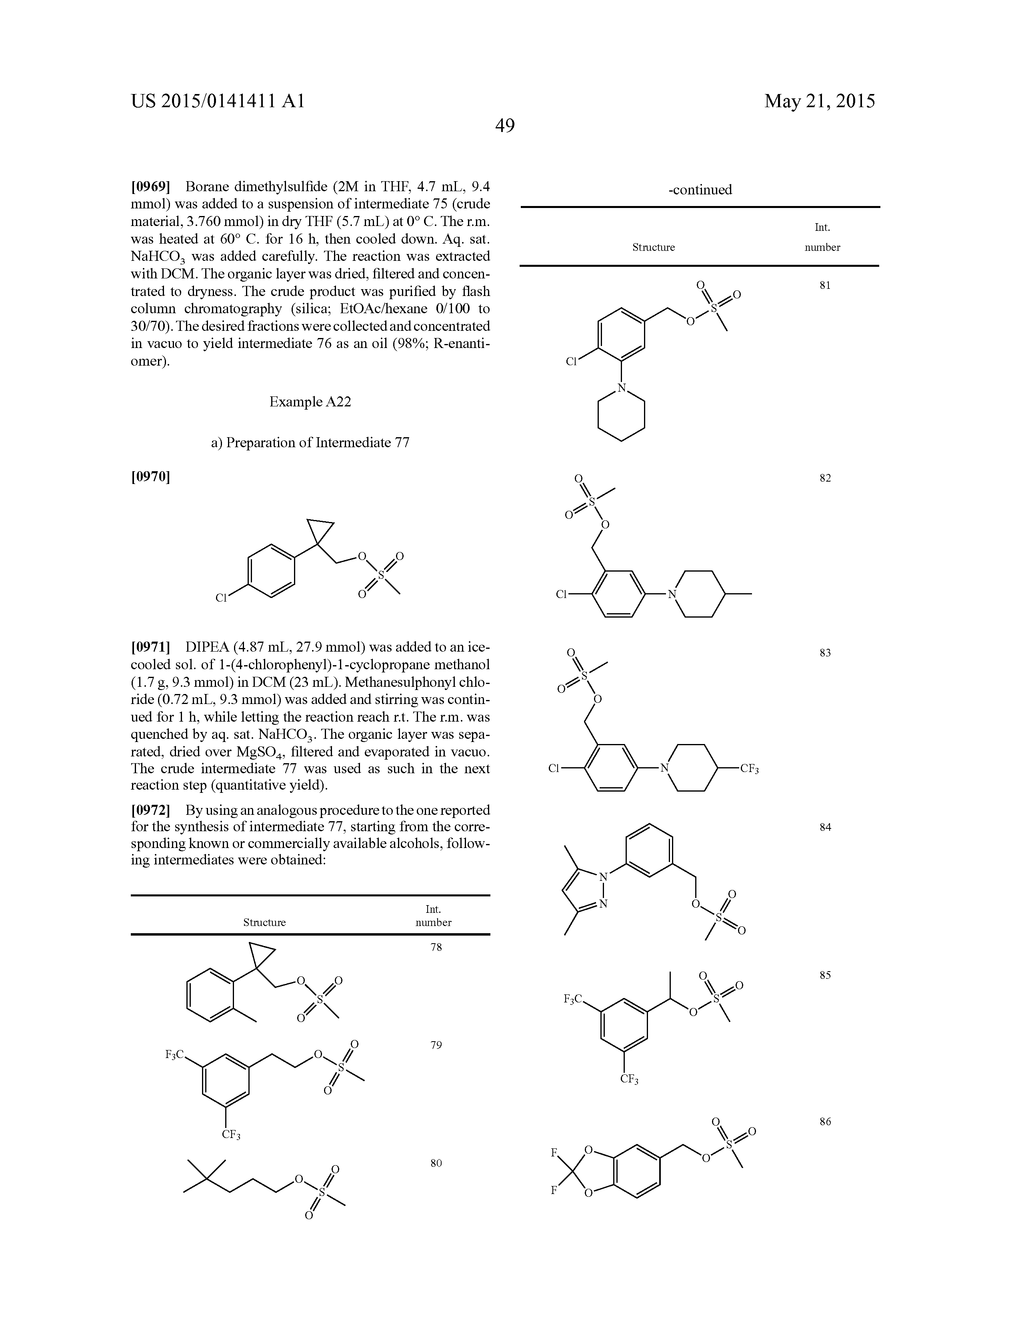 SUBSTITUTED 3,4-DIHYDRO-2H-PYRIDO[1,2-A]PYRAZINE-1,6-DIONE DERIVATIVES     USEFUL FOR THE TREATMENT OF (INTER ALIA) ALZHEIMER'S DISEASE - diagram, schematic, and image 50